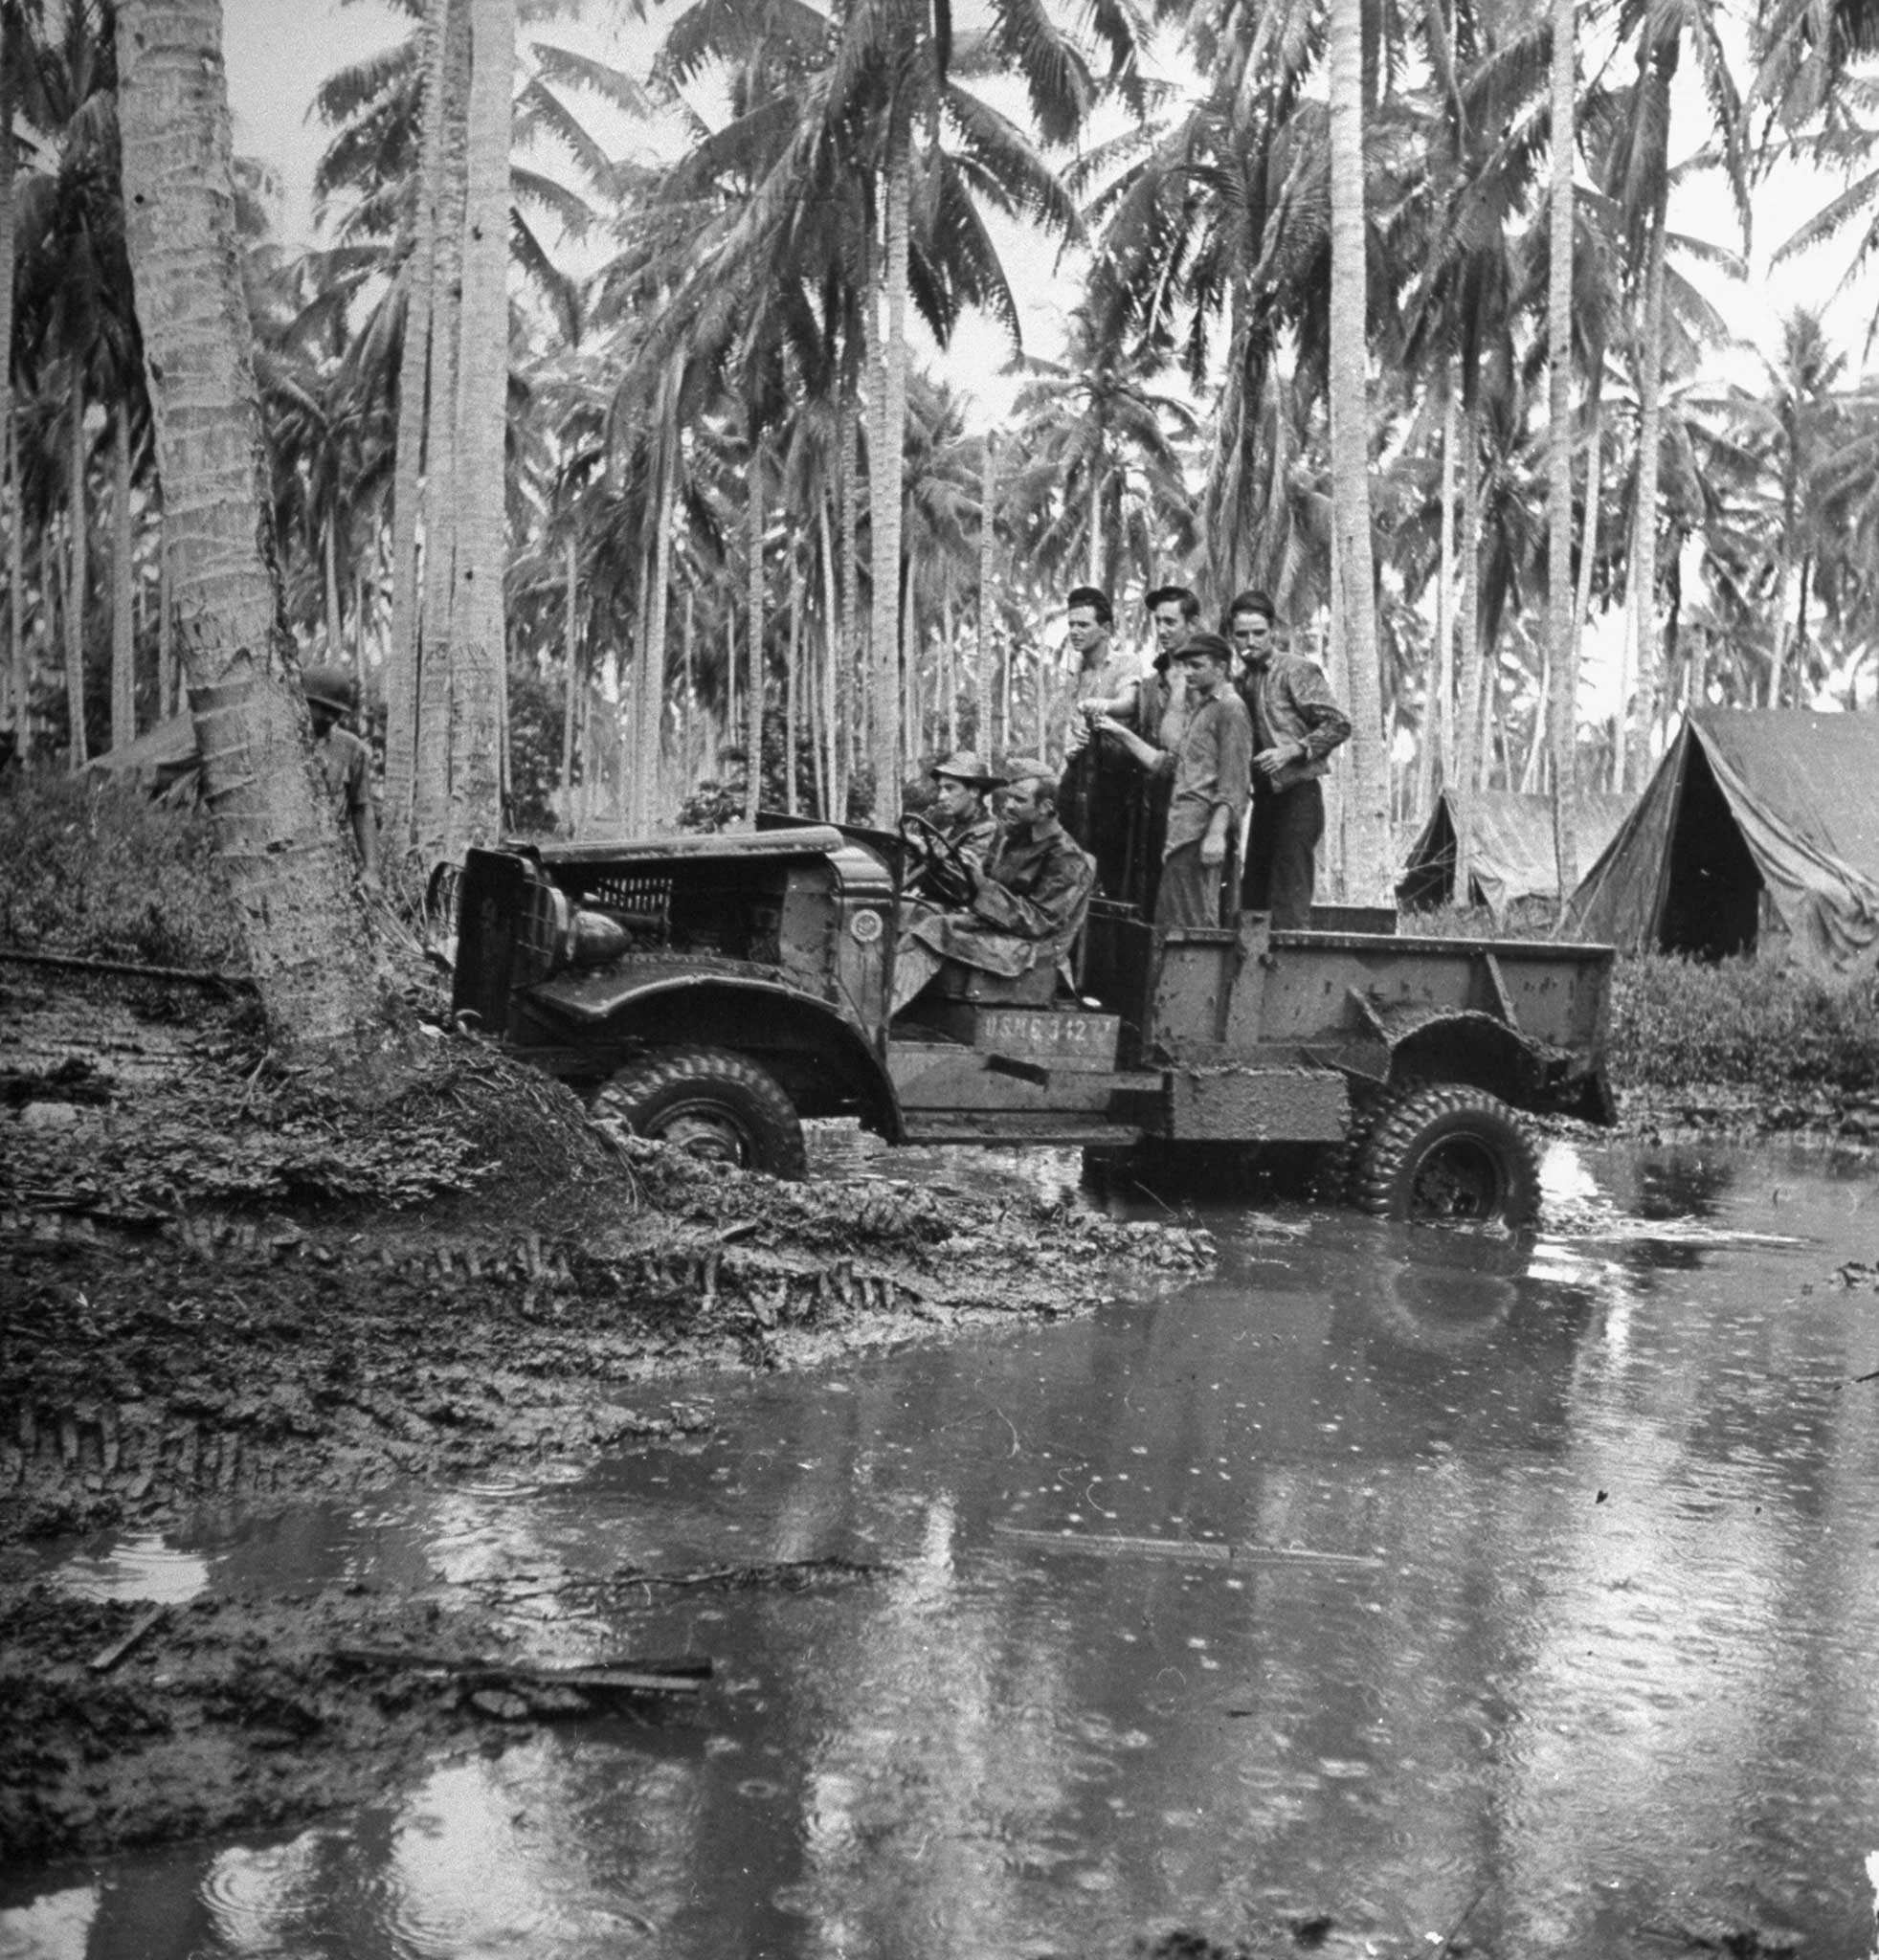 A Japanese truck captured by Marines is driven on a muddy road during the first Allied offensive in the Pacific, Guadalcanal, 1942.